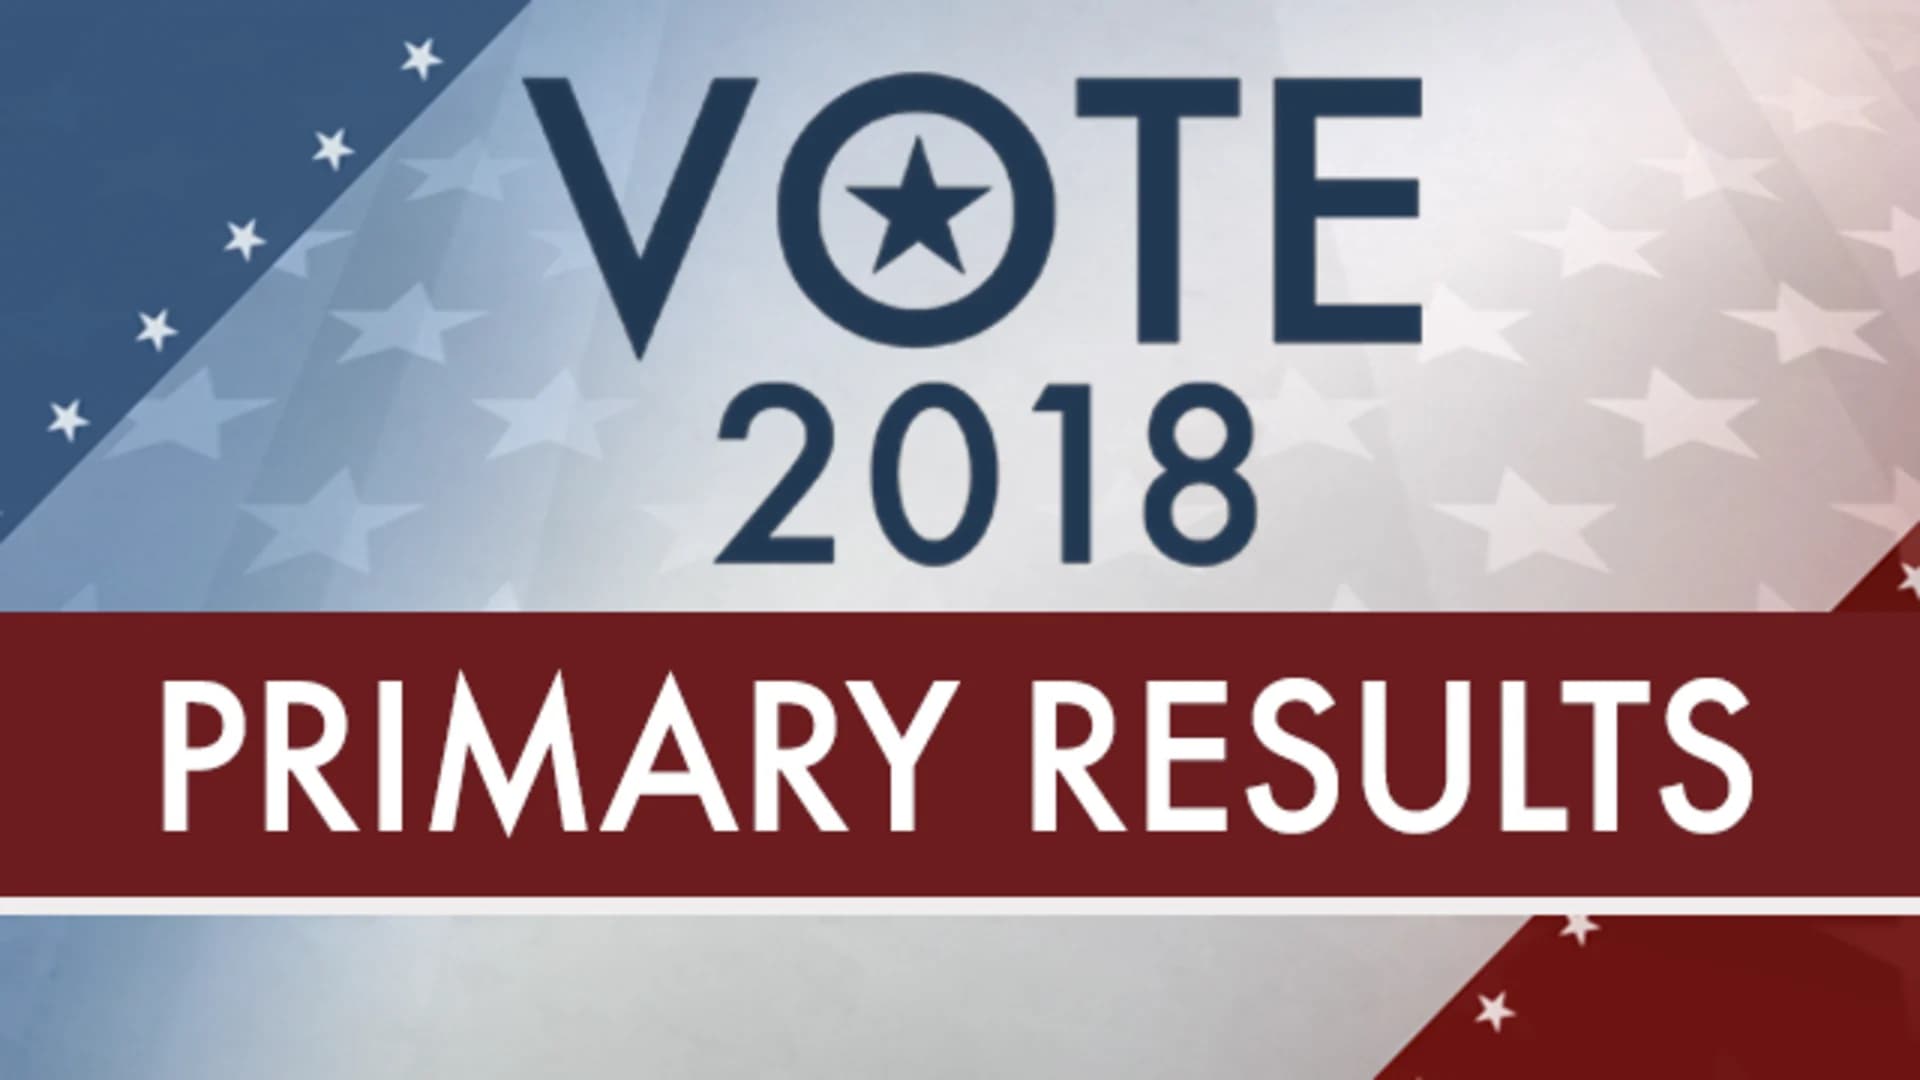 News 12 Brooklyn: Complete Primary Results